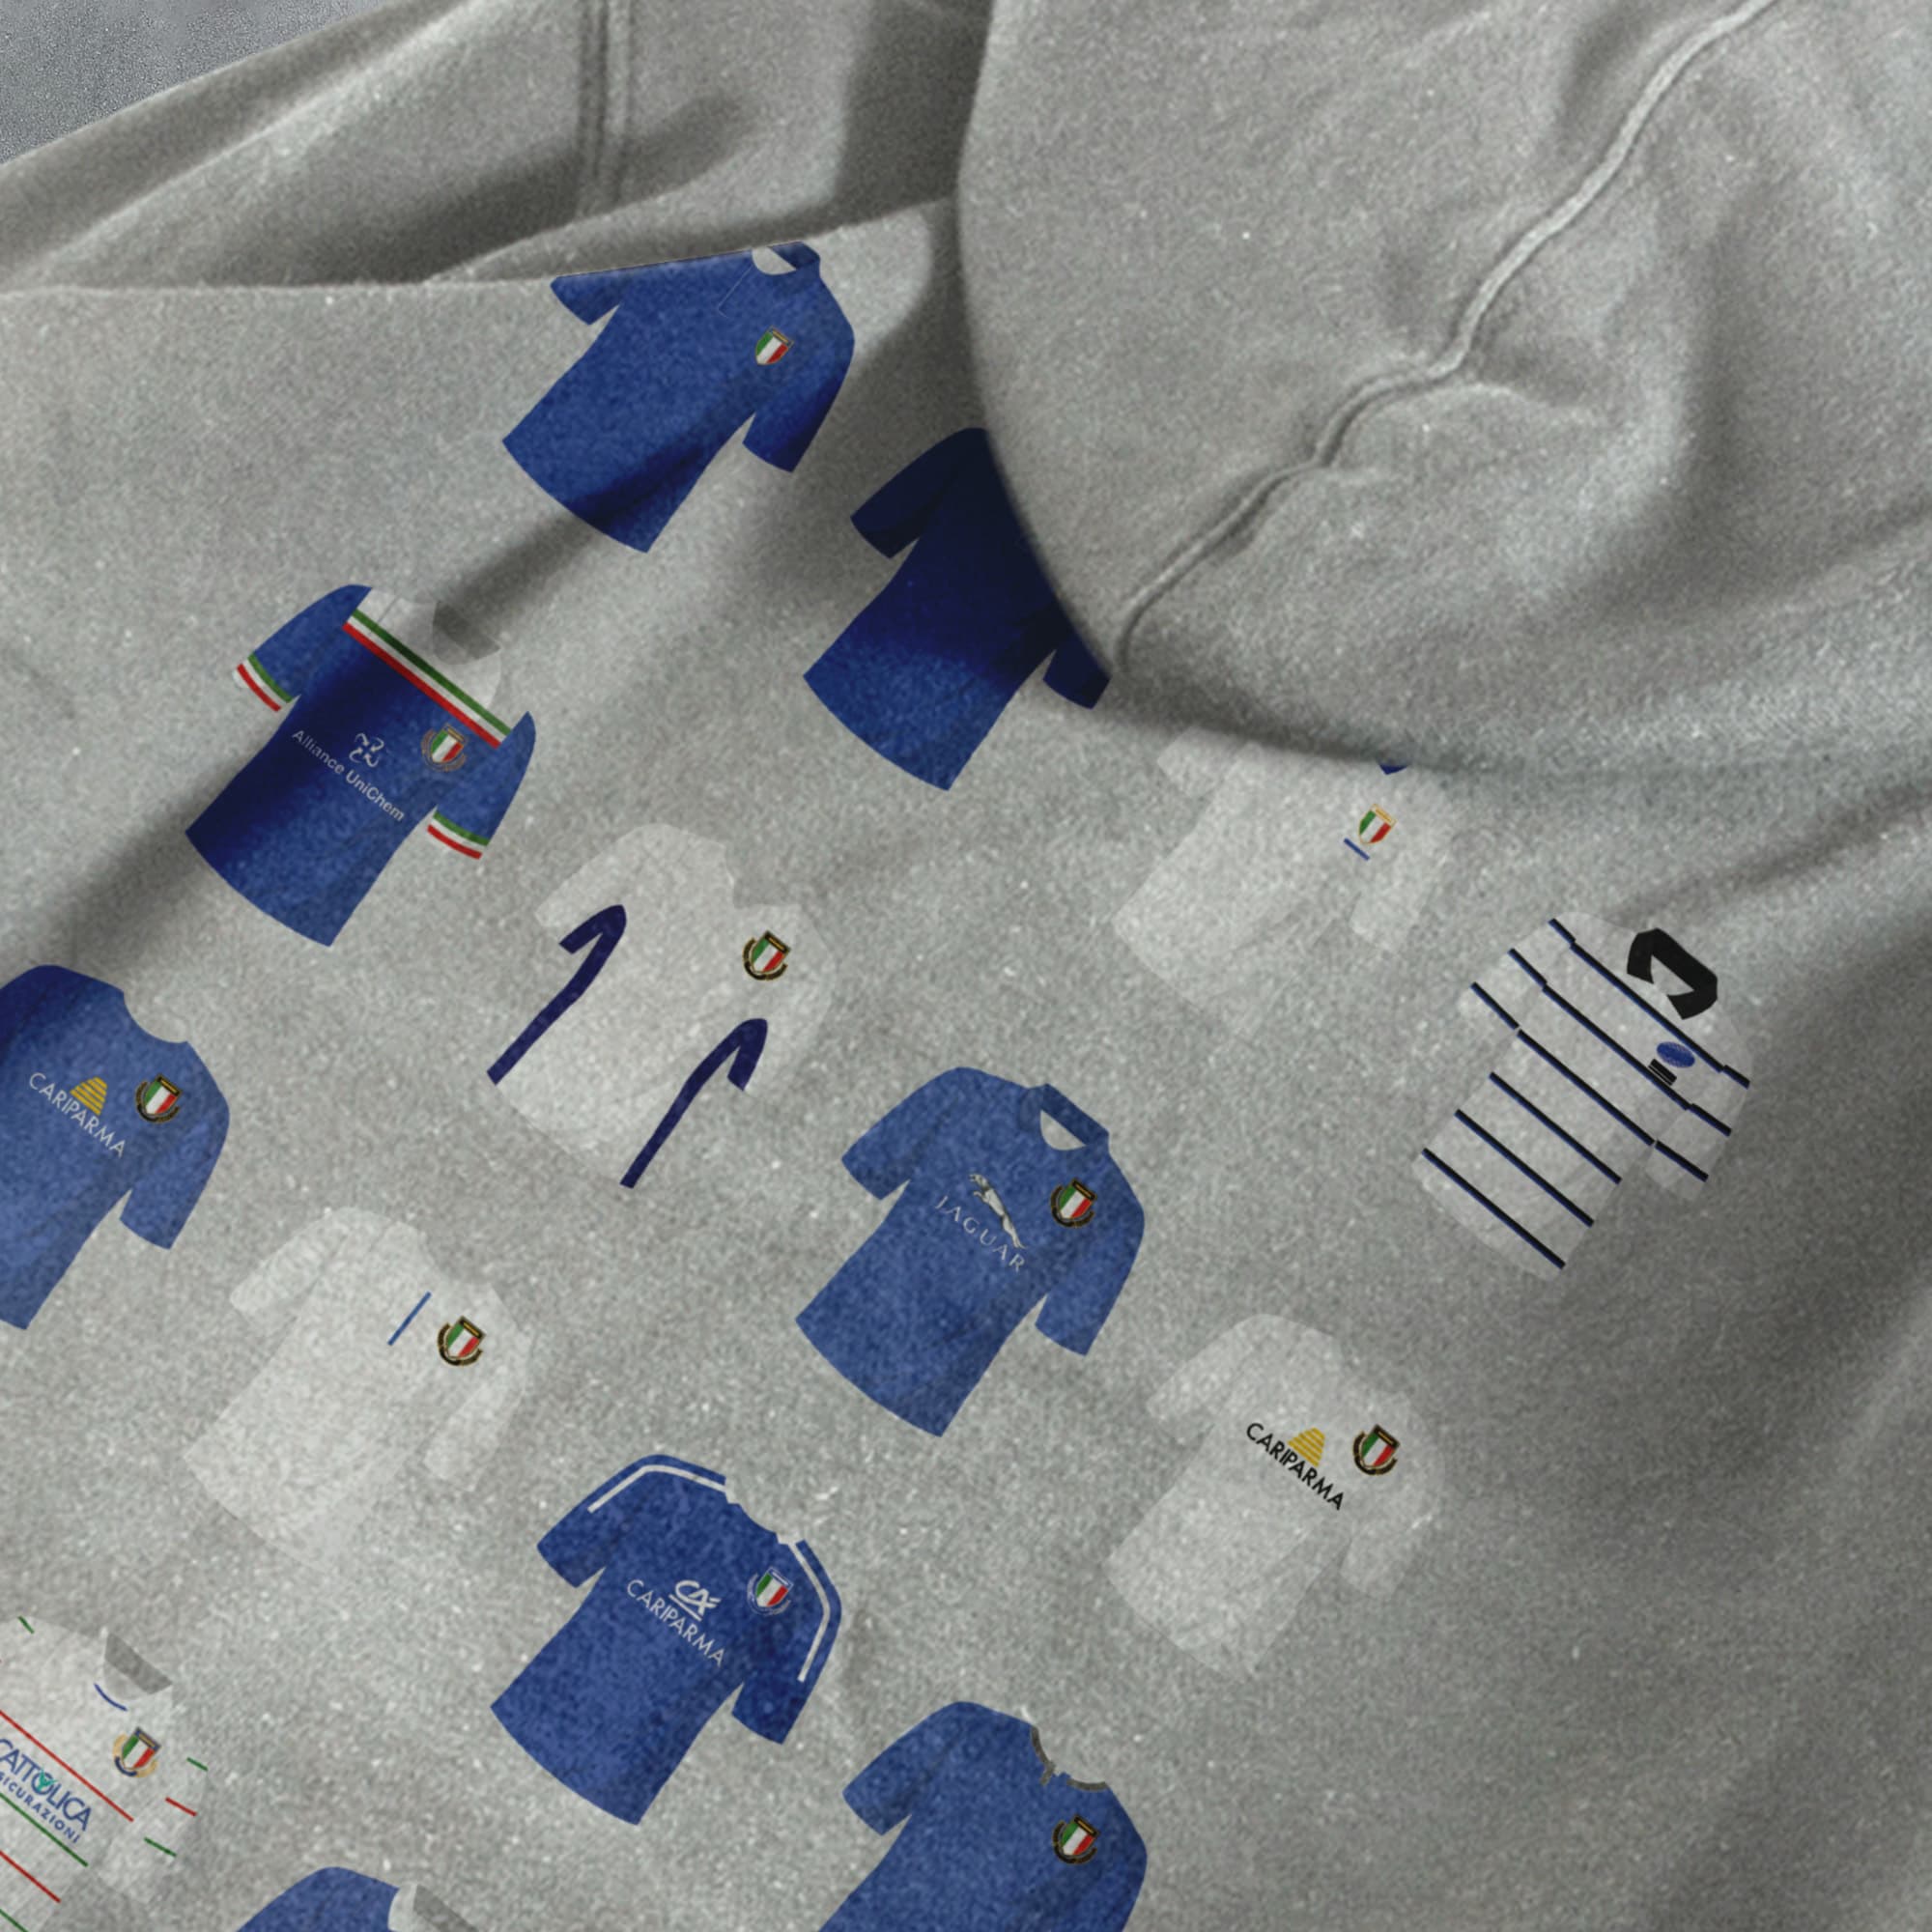 Italy Rugby Union Classic Kits Hoodie